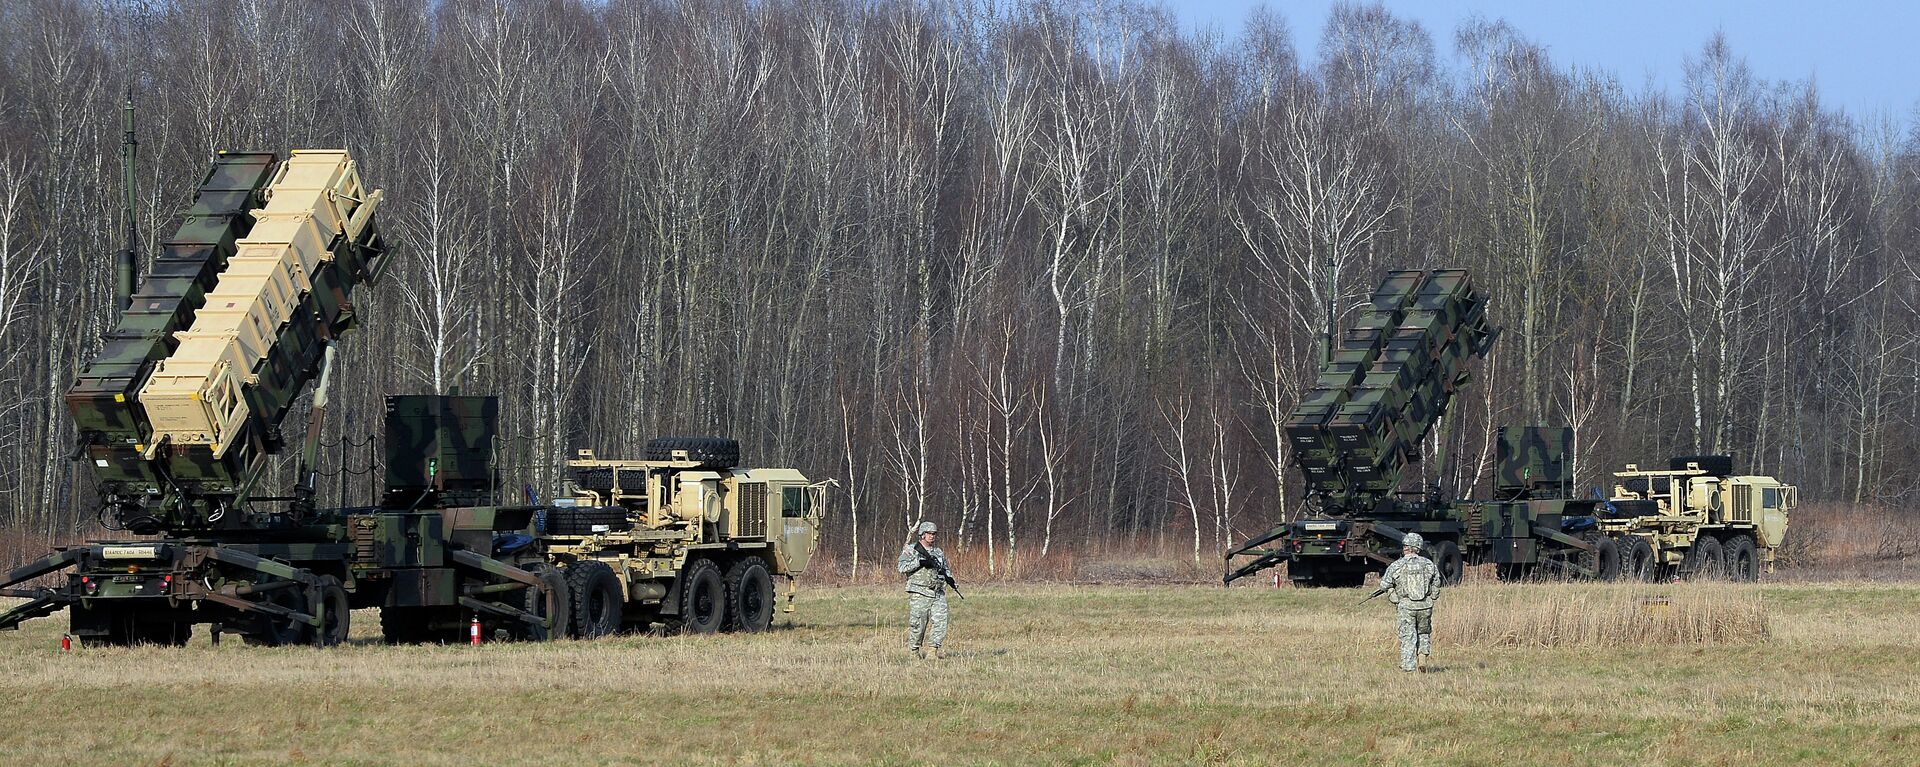 This picture taken on March 21, 2015 shows US troops from the 5th Battalion of the 7th Air Defense Regiment emplace a launching station of the Patriot air and missile defence system at a test range in Sochaczew, Poland - Sputnik International, 1920, 15.12.2022